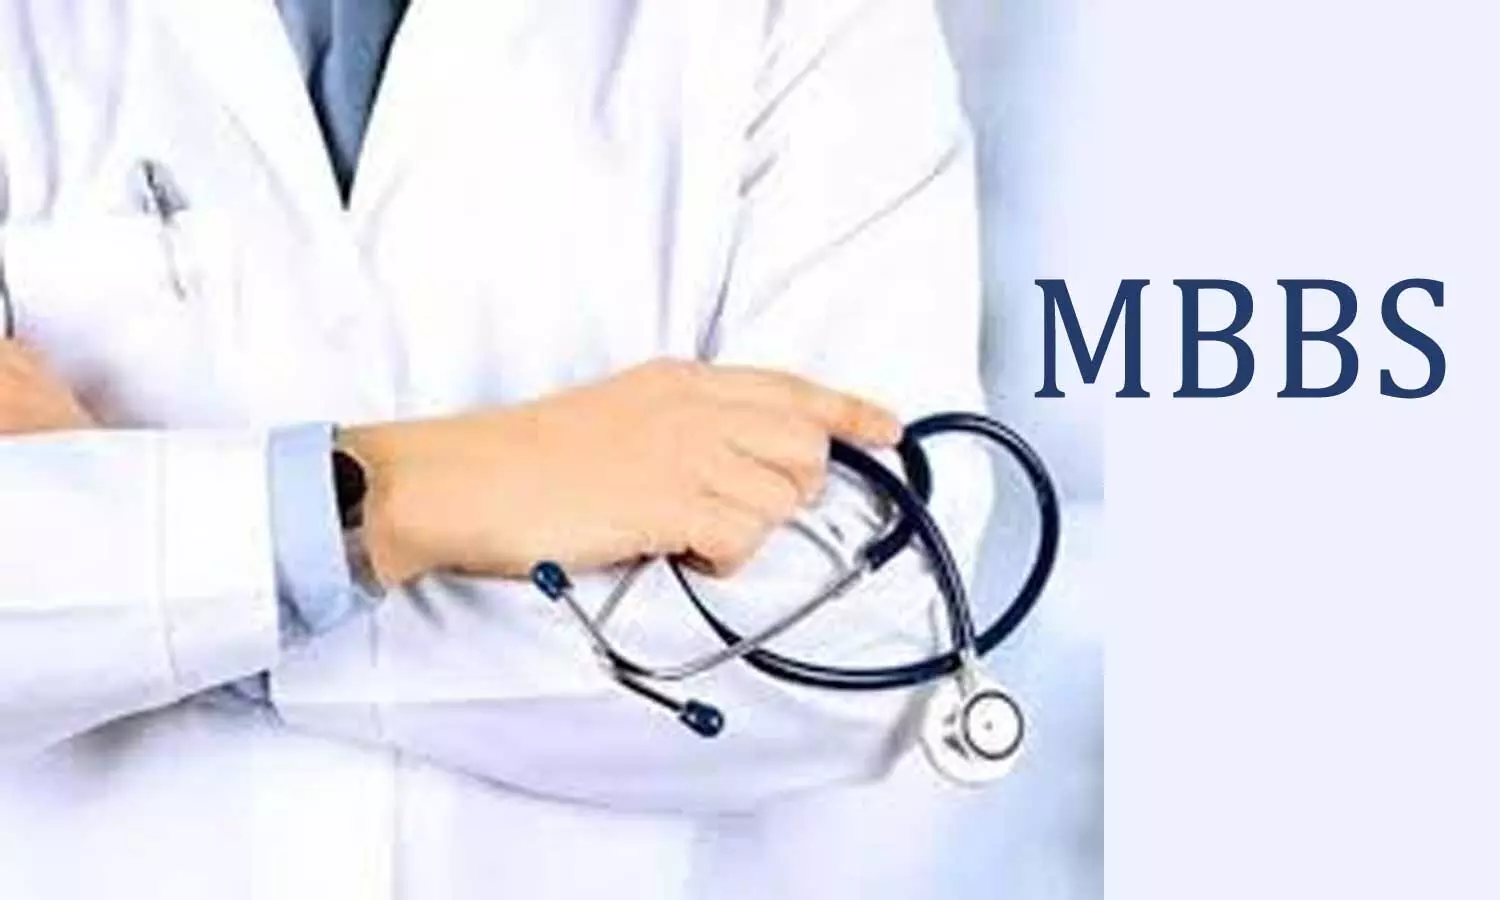 MBBS at JIPMER: Admissions to be based on NEET score only, MCC to conduct counselling